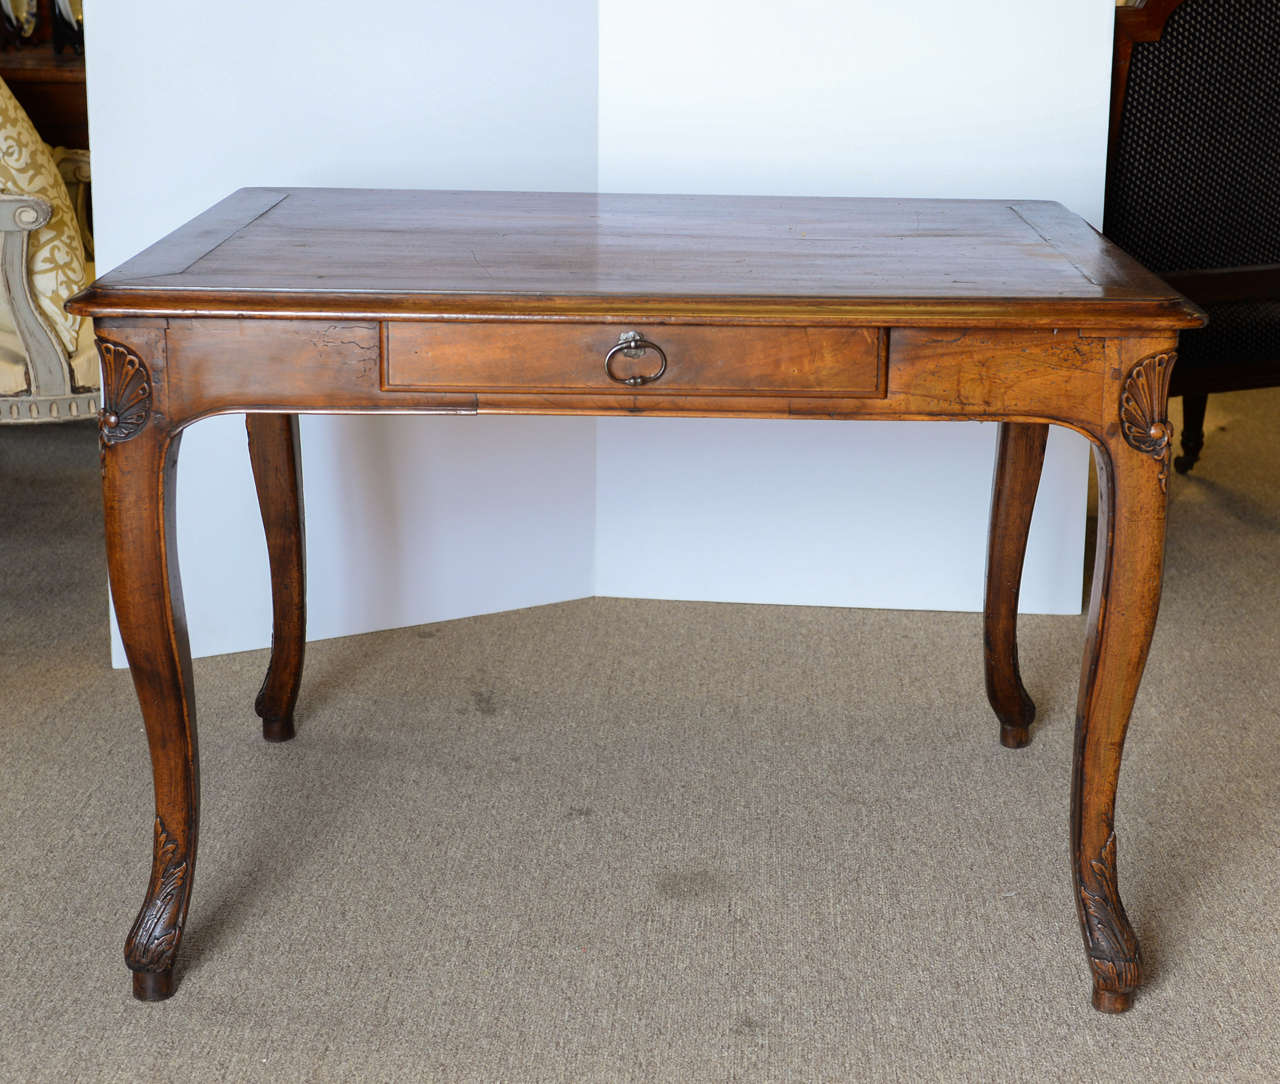 French 18th Century Regence Period Table from Lyon